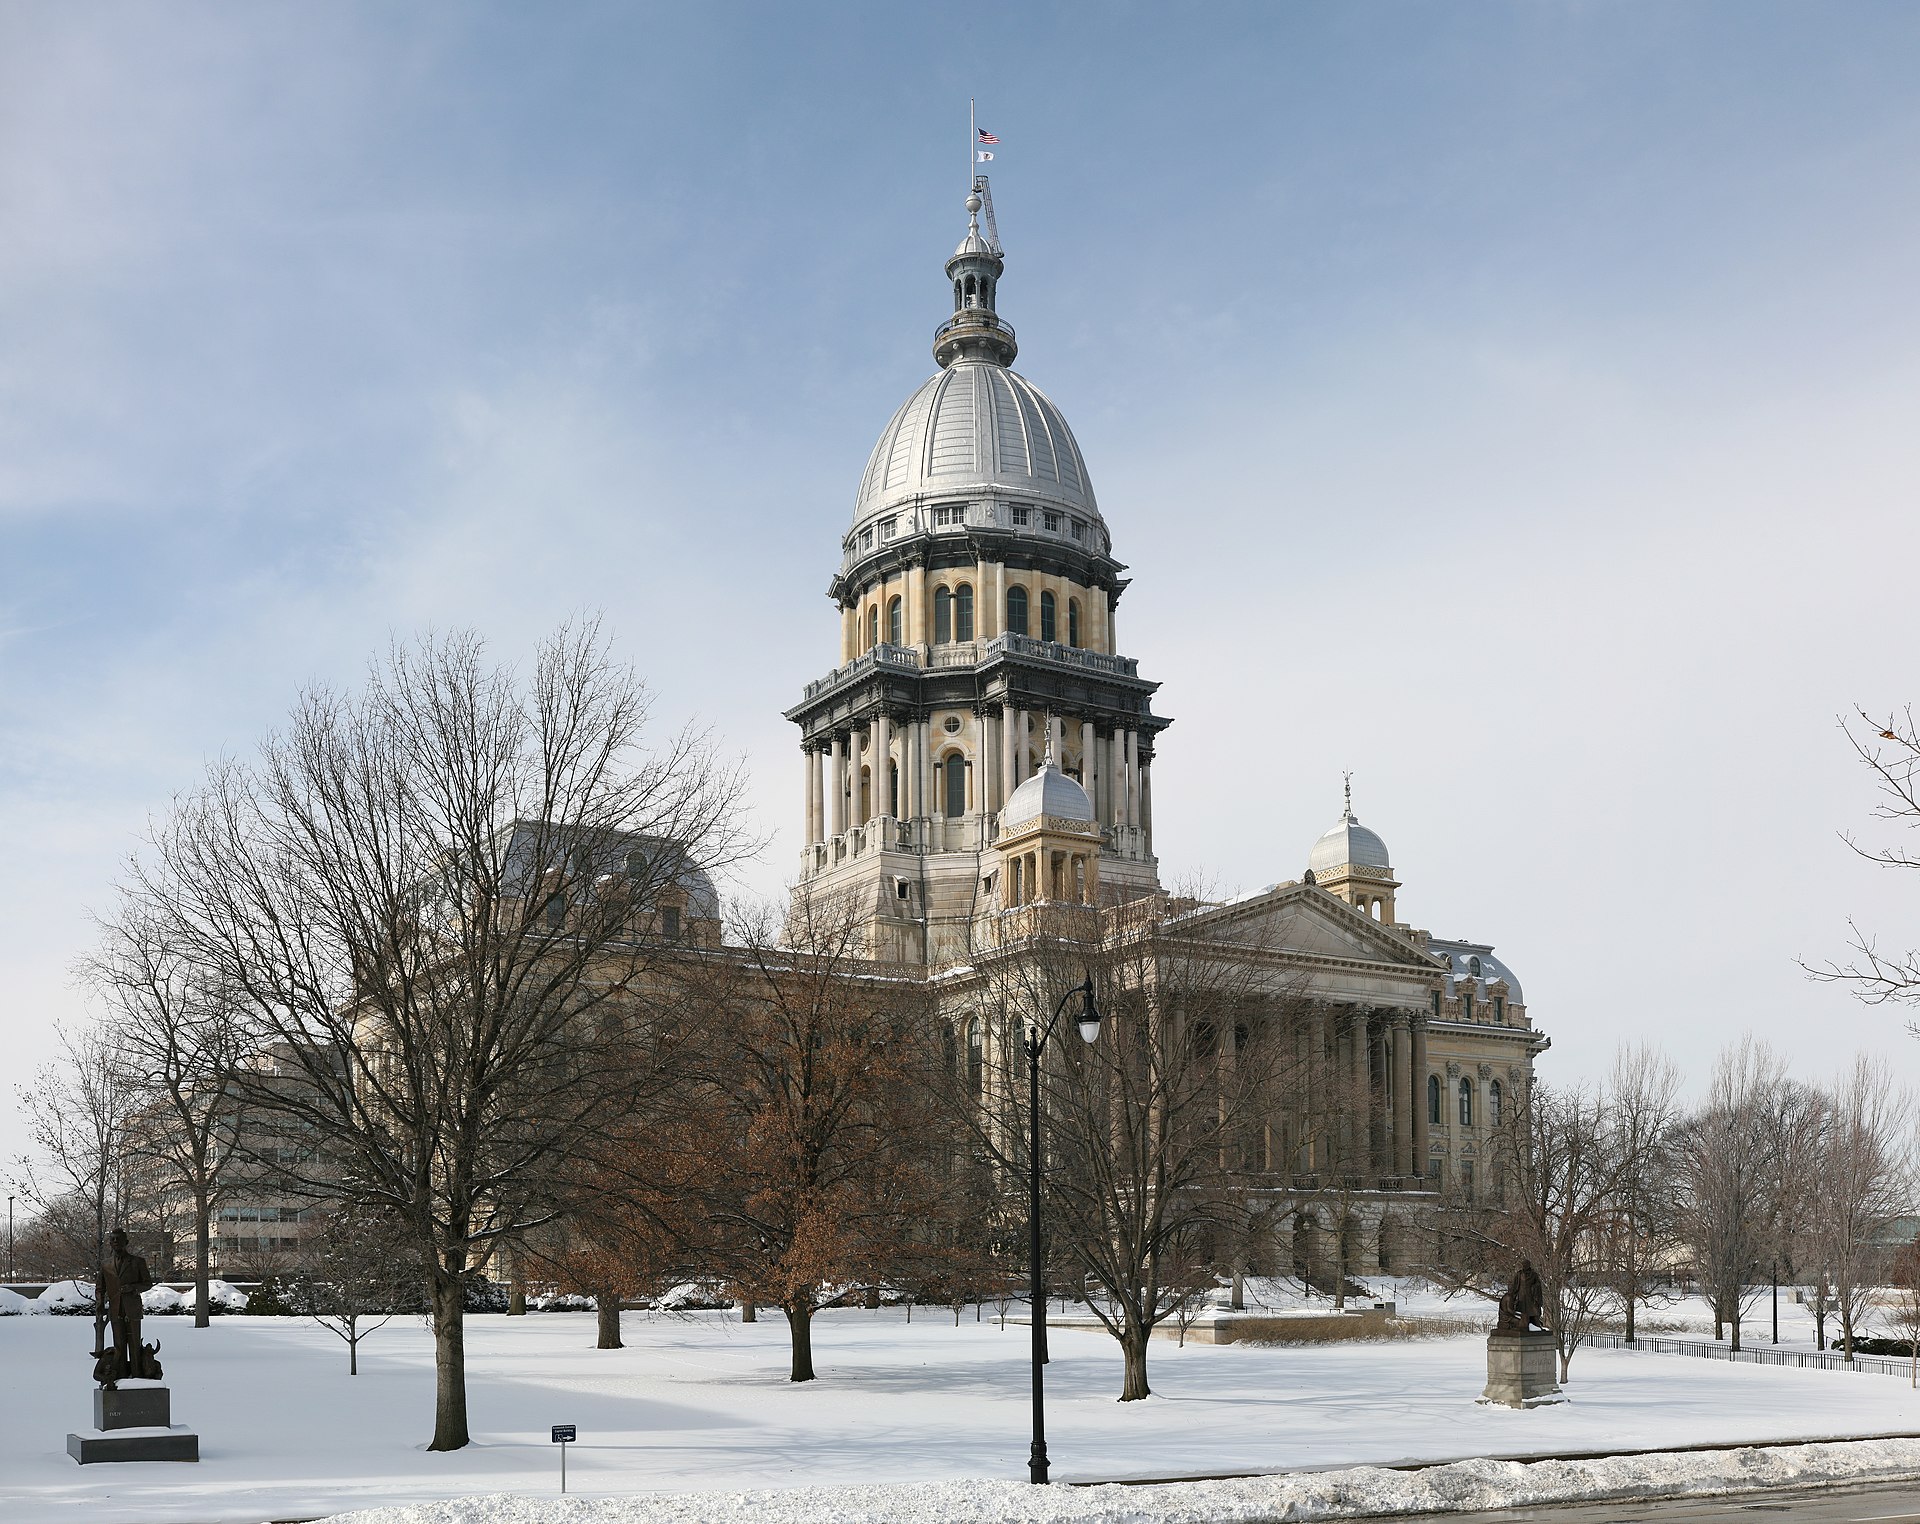 Illinois State Capitol building. It is winter, there is snow on the ground. The neoclassical revival building has a dome in the middle.